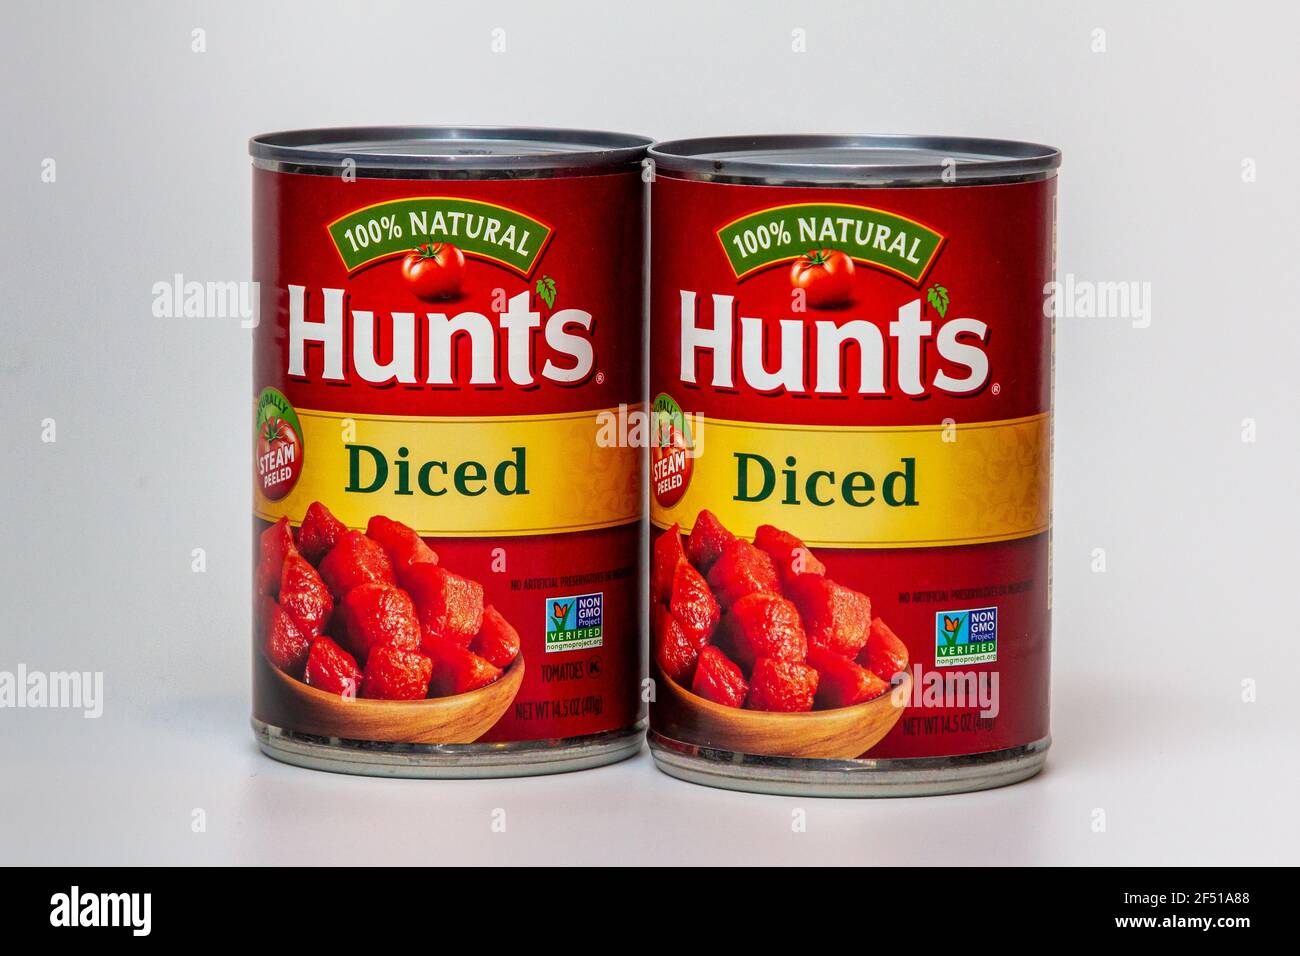 ST. PAUL, MN,USA - MARCH 7, 2021 - Hunt's Diced Tomatoes cans and trademark logo. Stock Photo